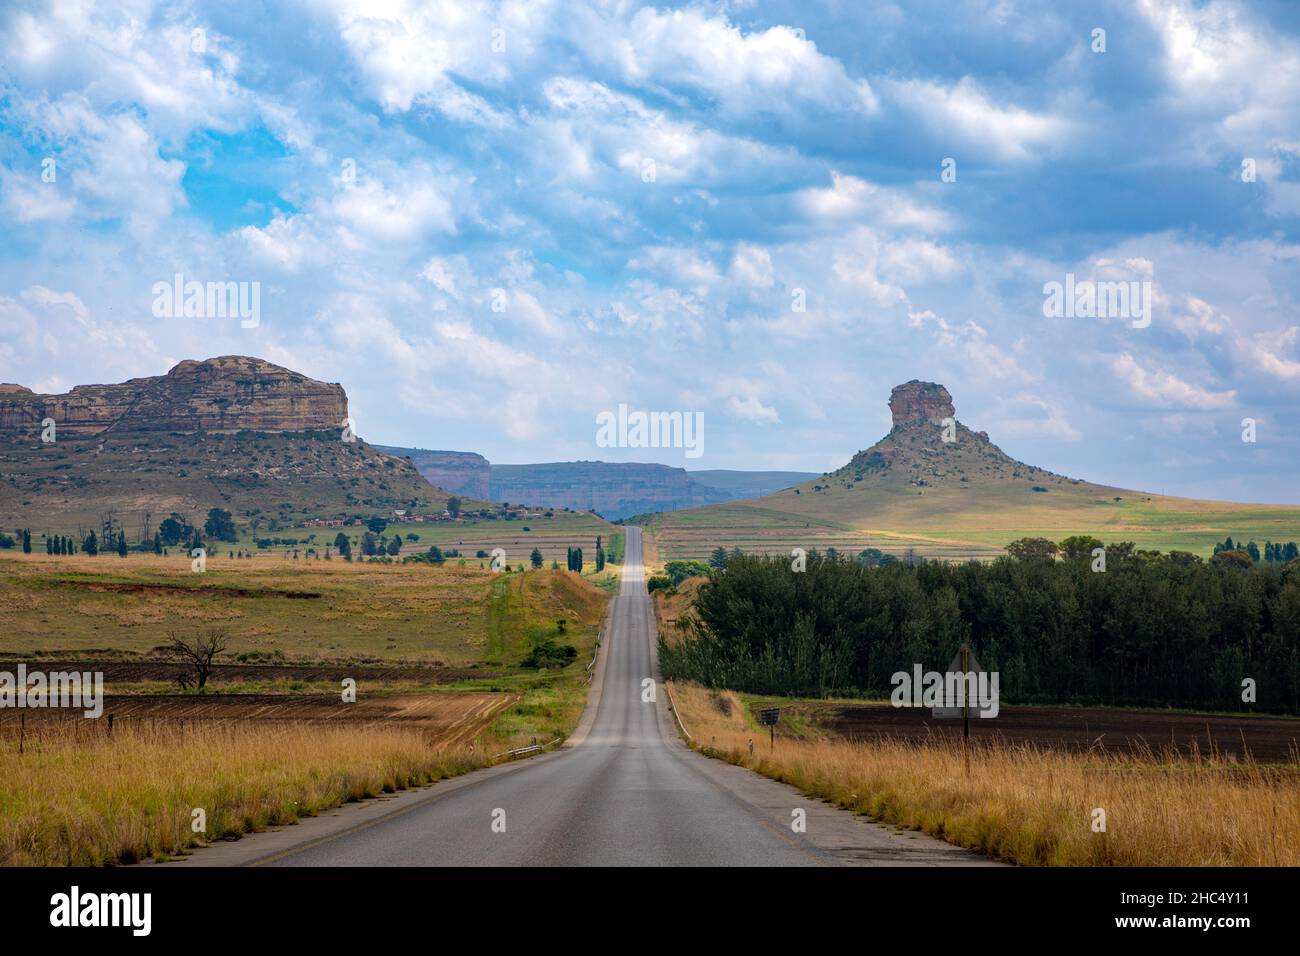 Landscape in the Eastern Freestate of South Africa with an empty road and mountains Stock Photo